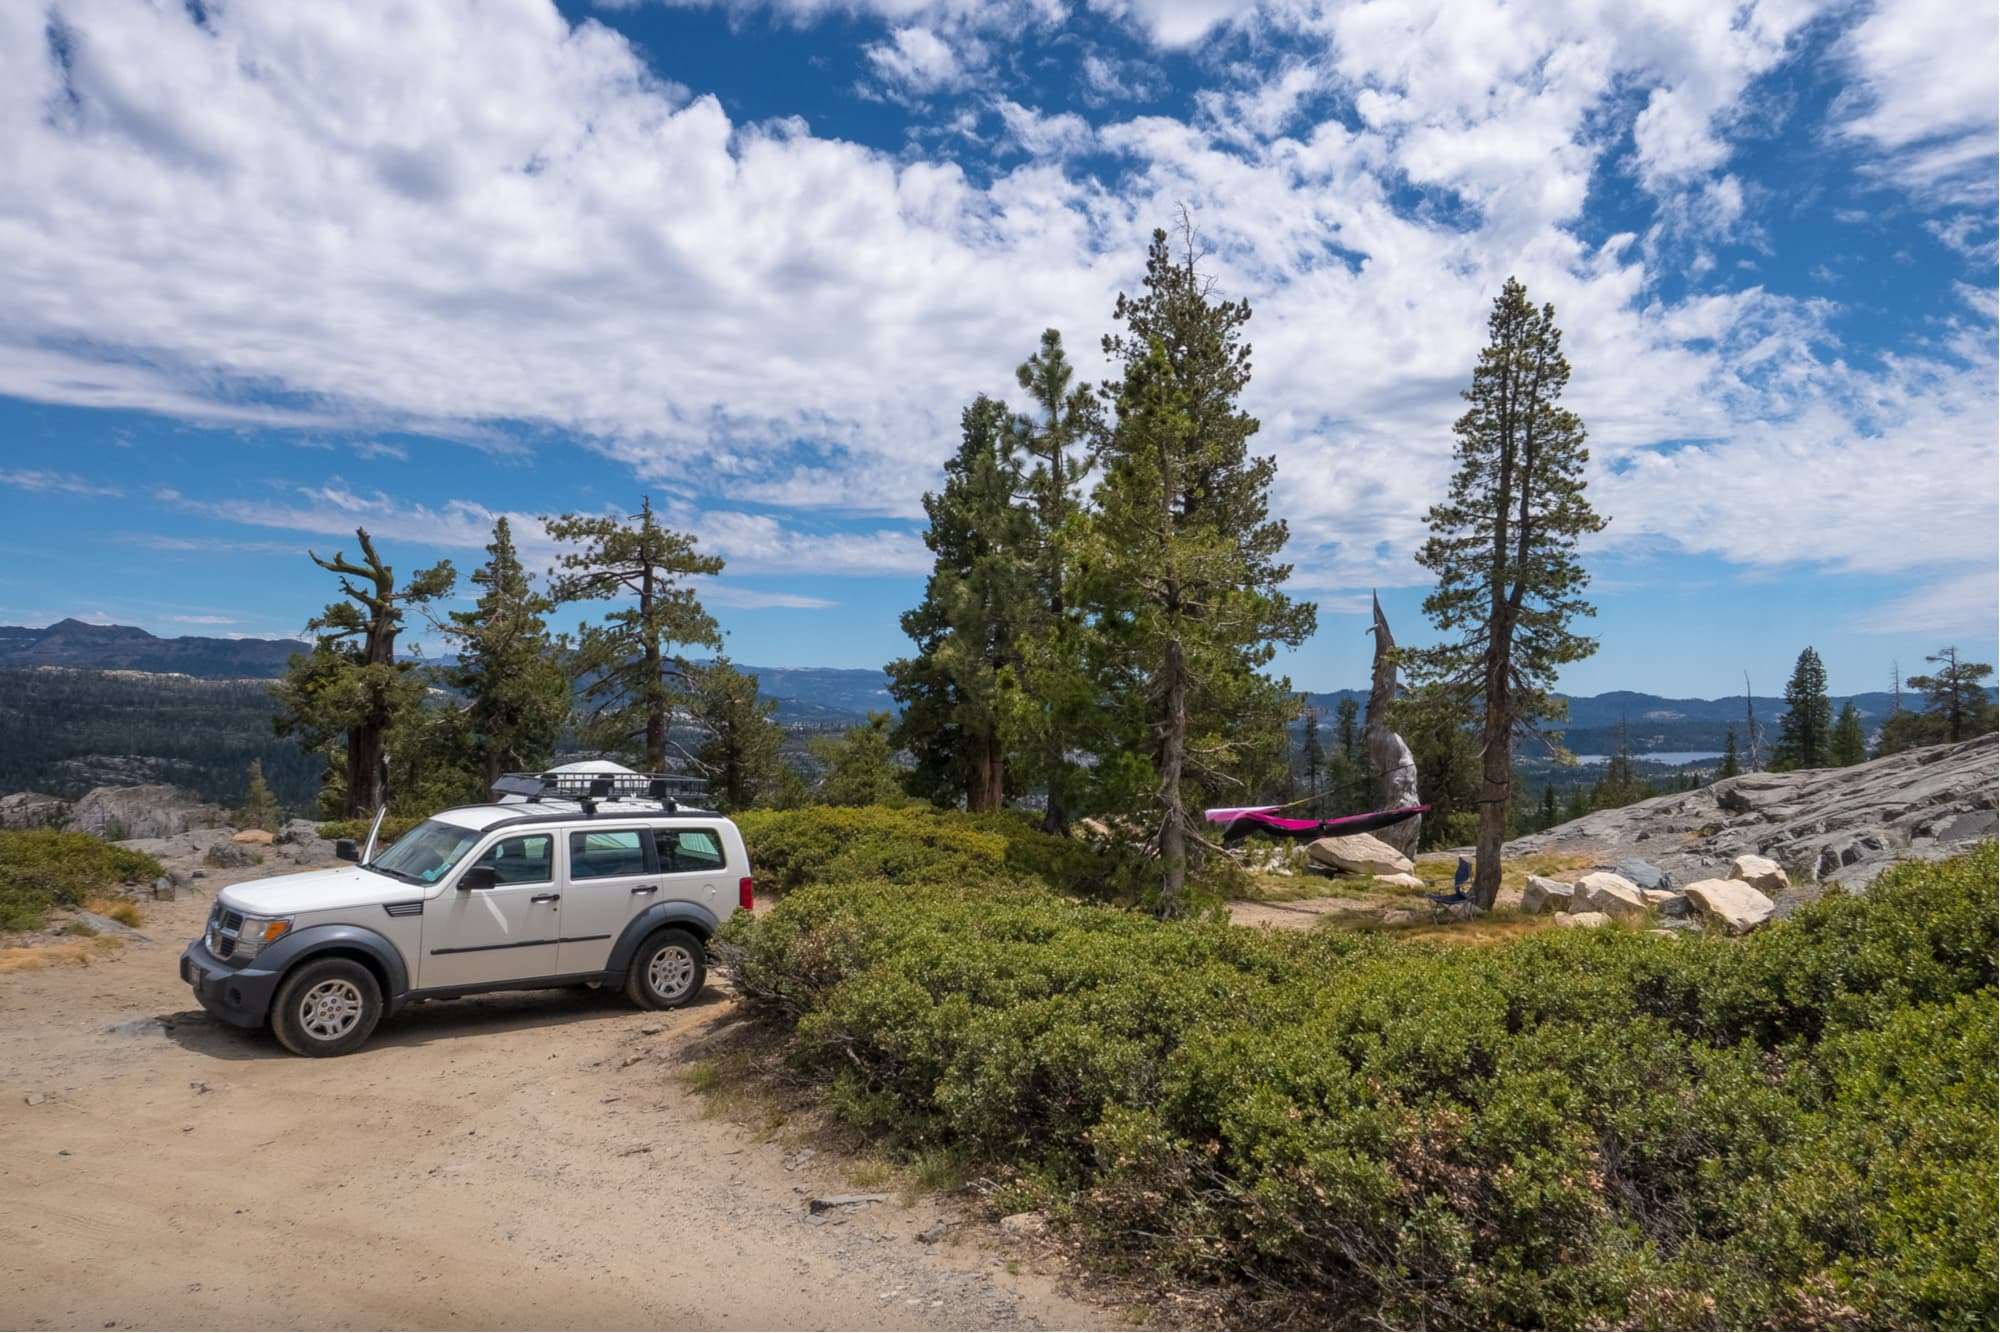 12 Free Campgrounds in California and How to Find More